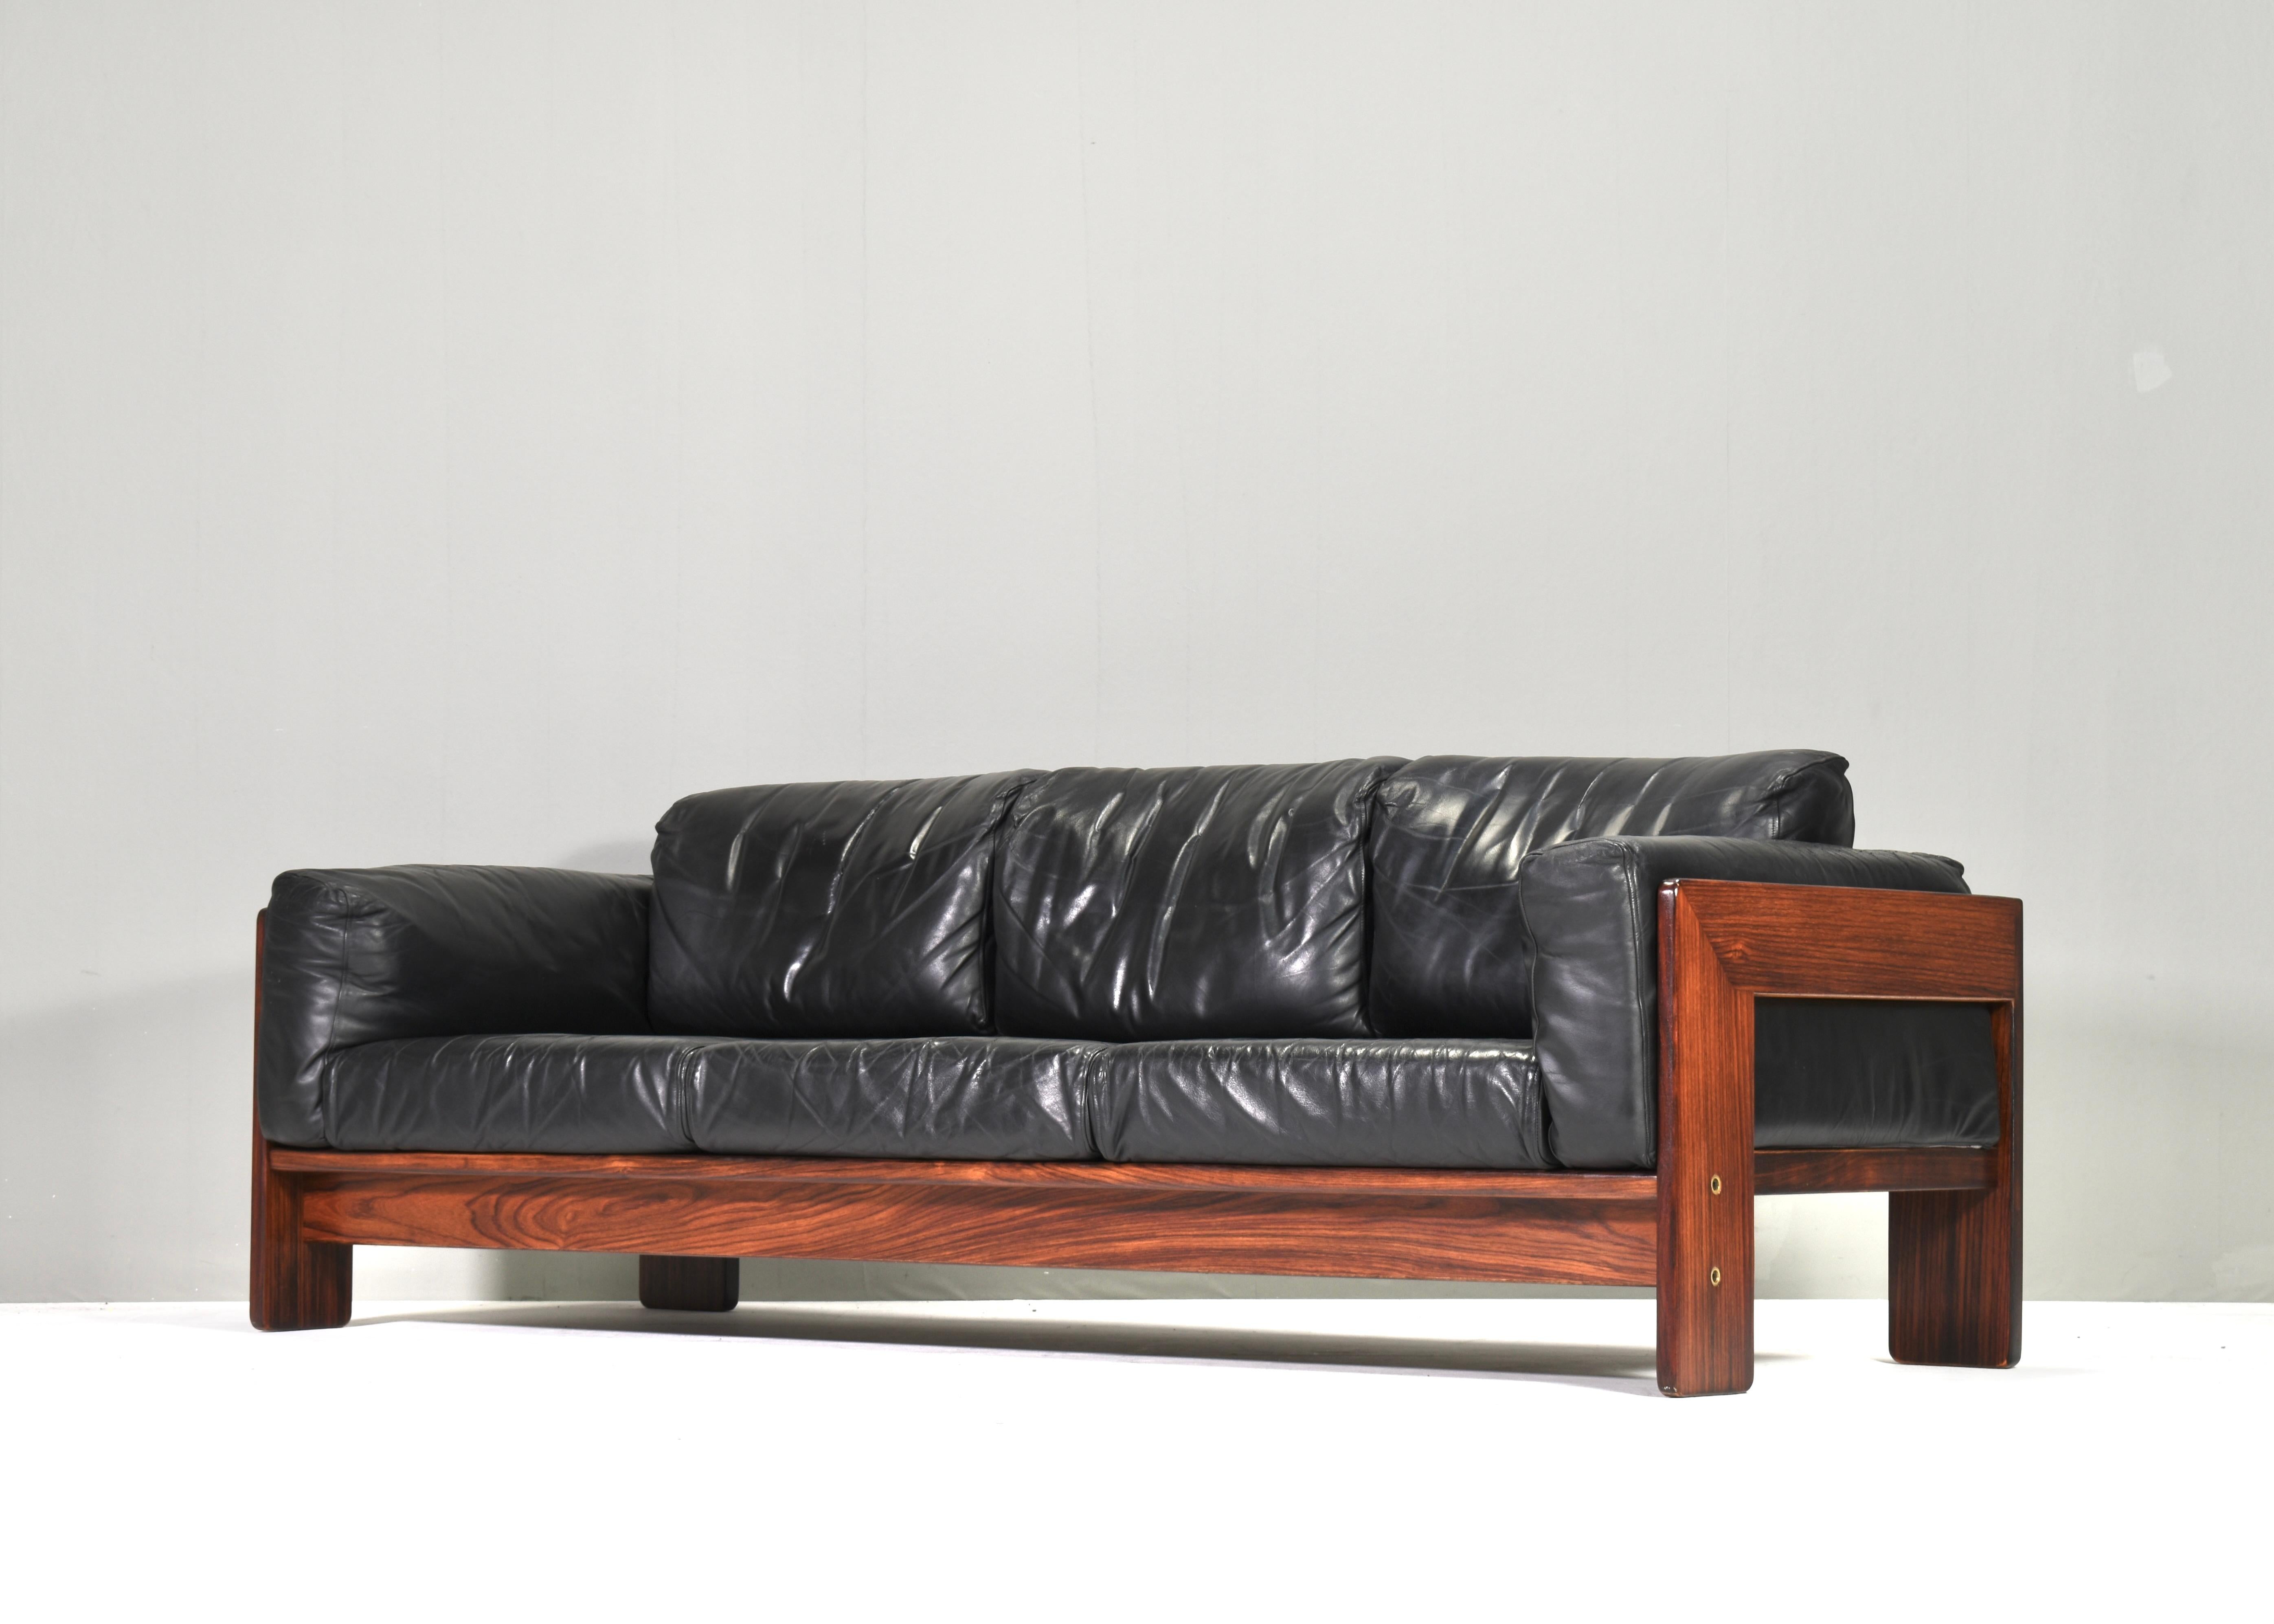 Mid-Century Modern BASTIANO Sofa in black leather by Afra and Tobia Scarpa for KNOLL – Italy, 1962 For Sale